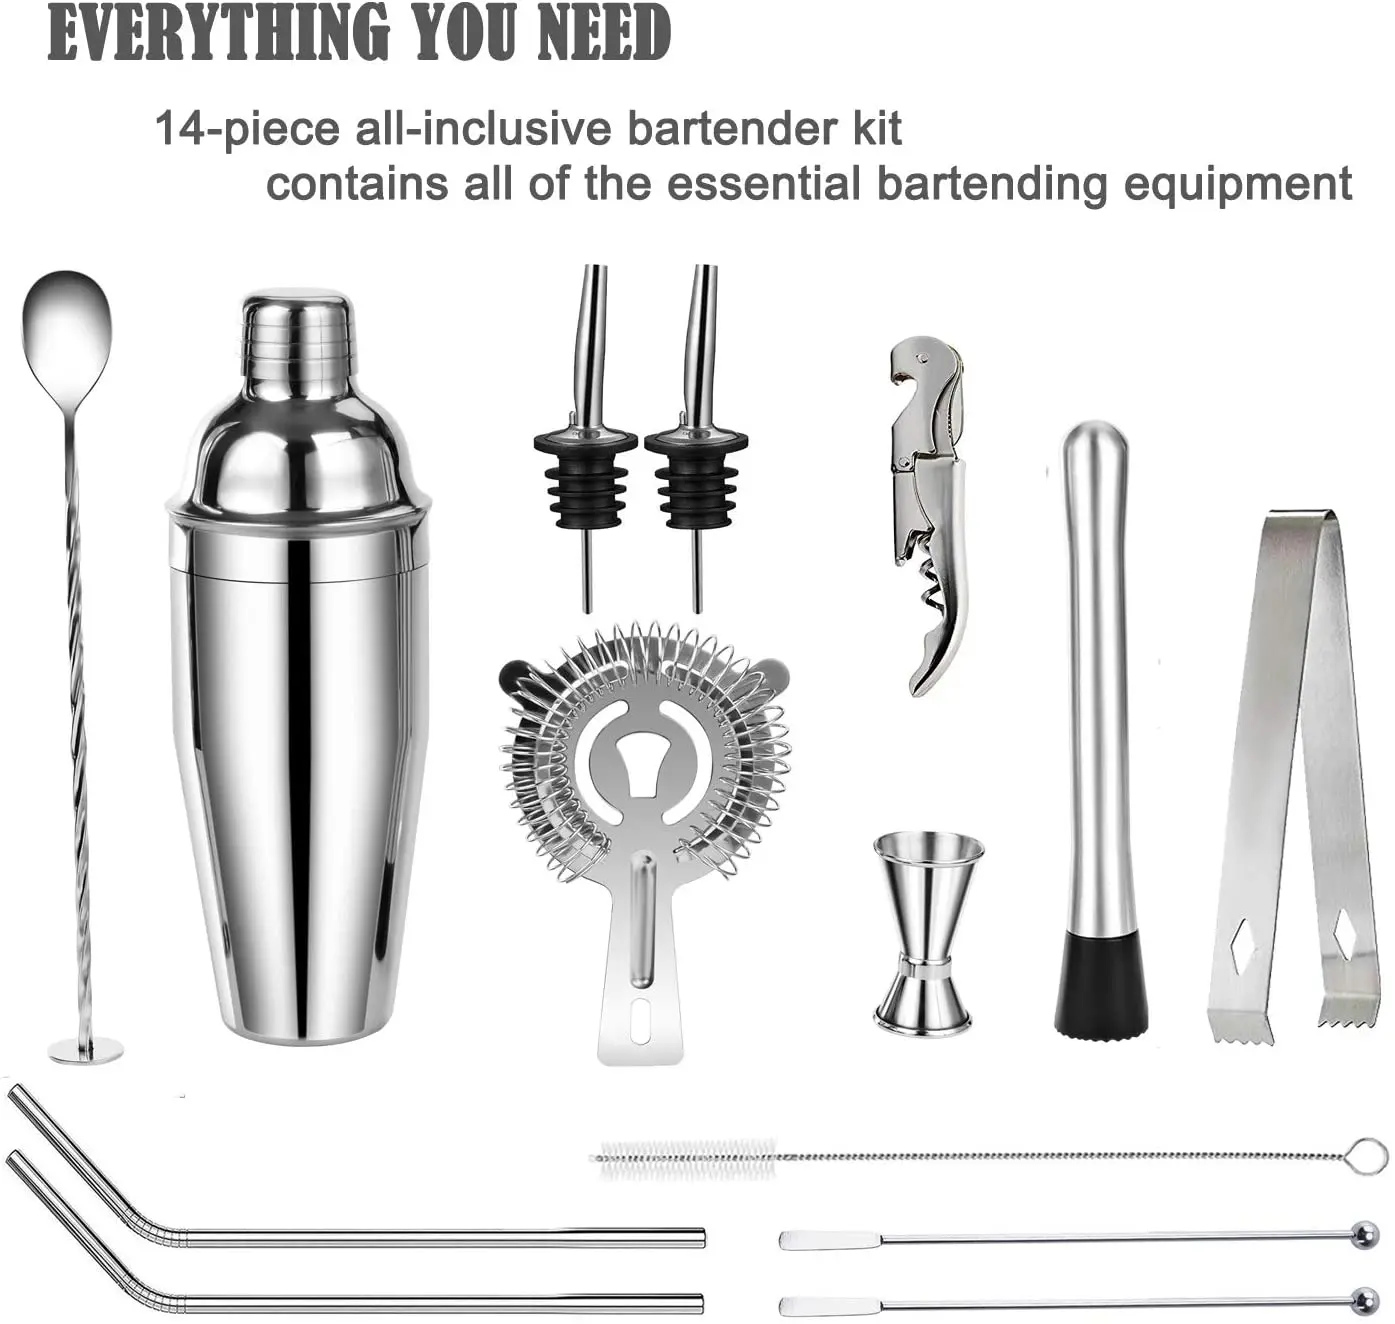 Brushed Stainless Steel Bartender Kit  with Pour Spouts Best Selling Products 2020